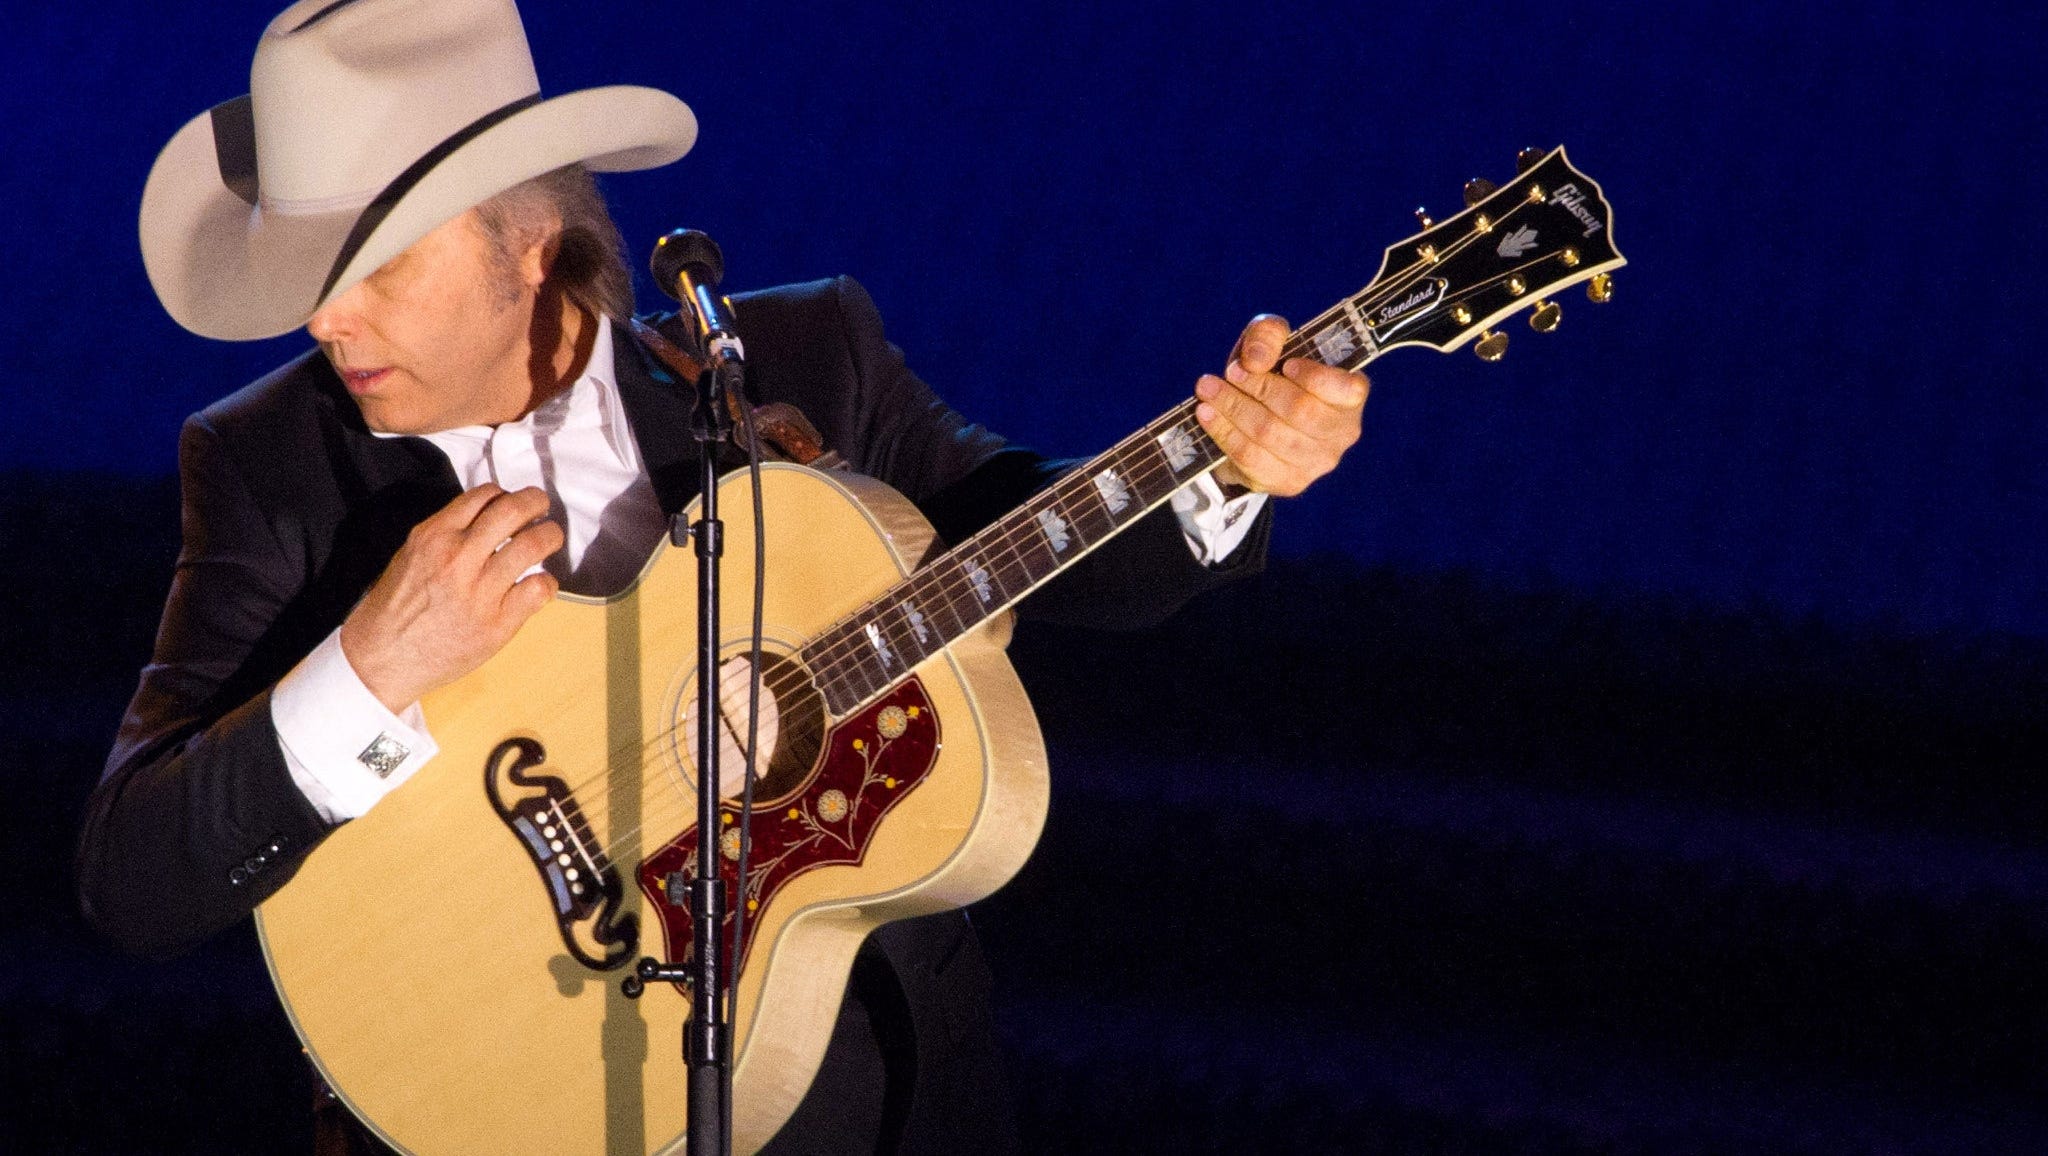 Dwight Yoakam S Rockin Country Style Wins Over Fans